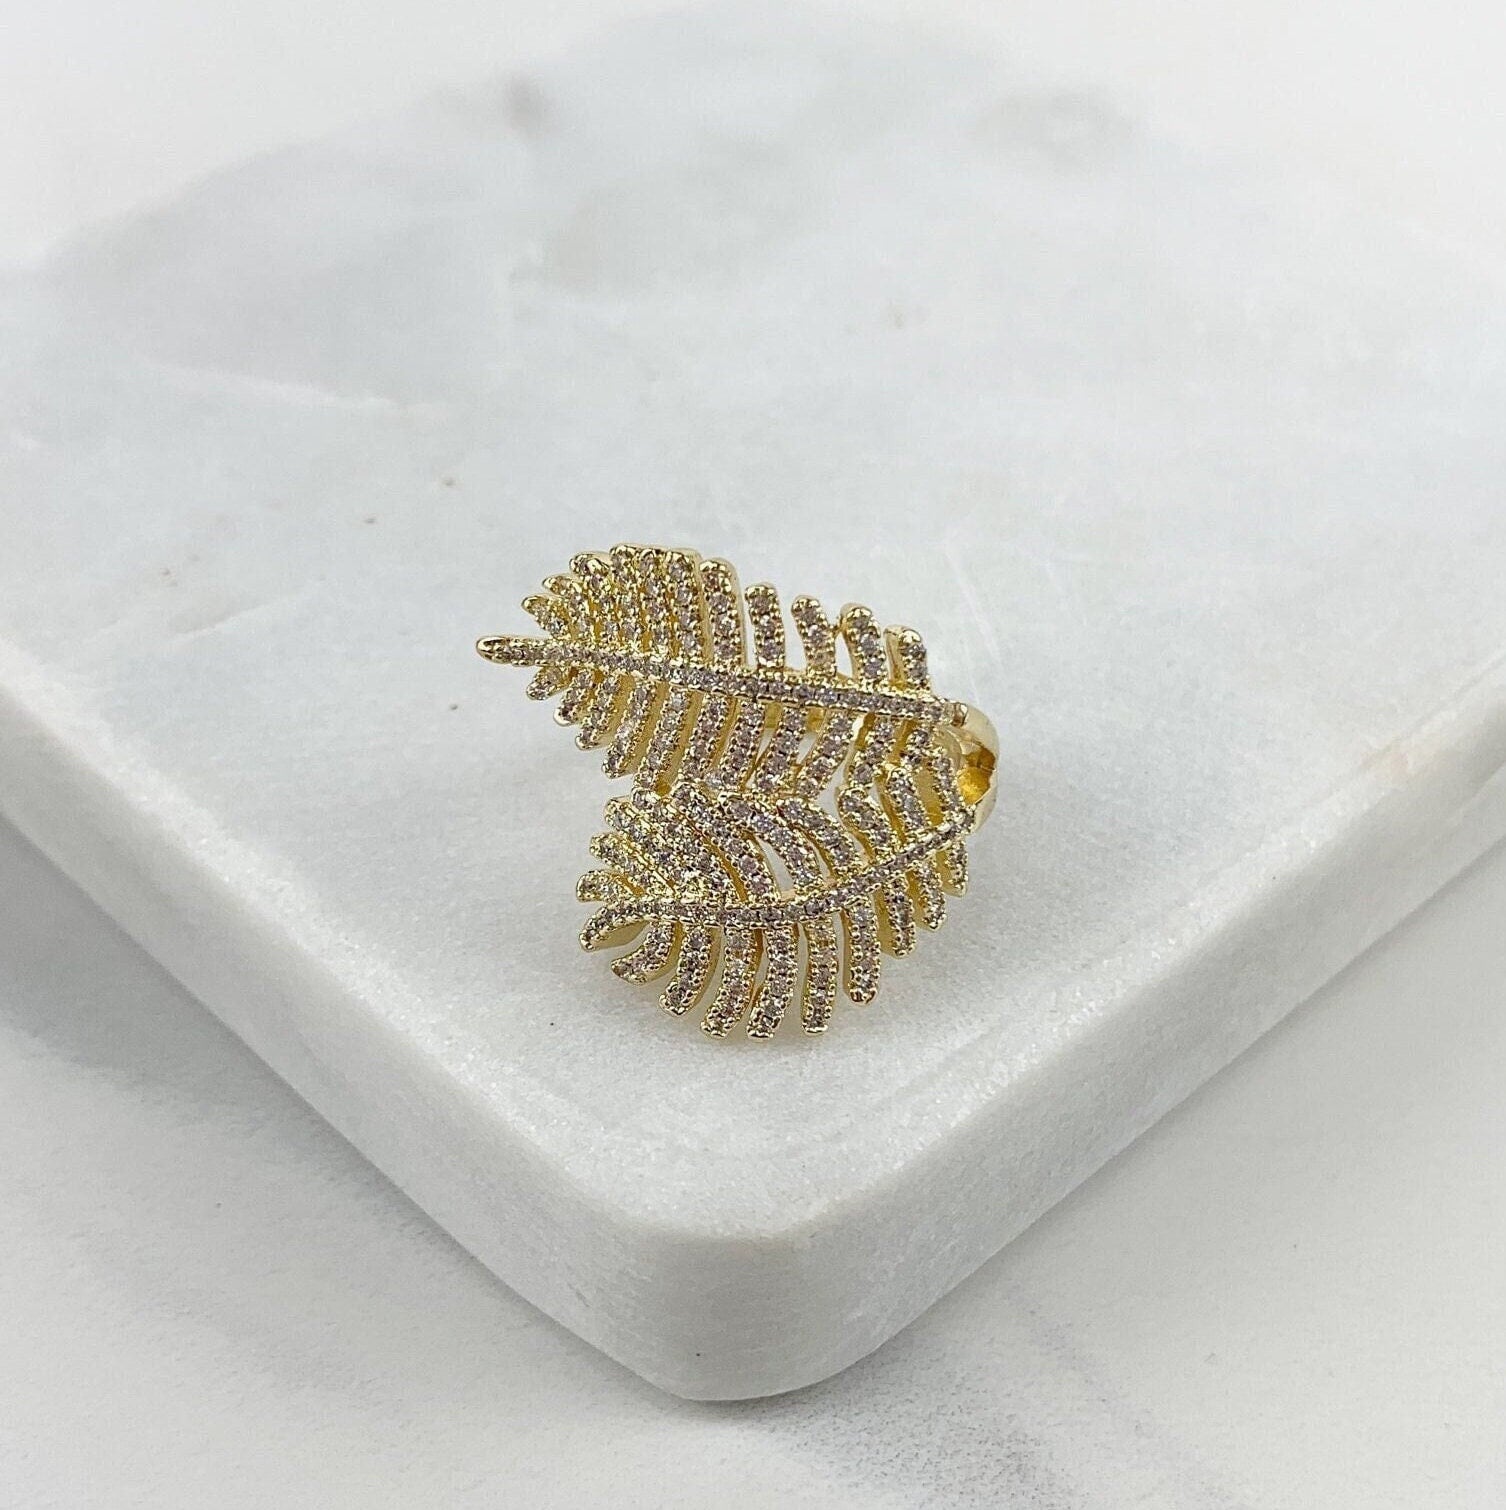 18k Gold Filled Large Double Leaf Ring Featuring Micro Cubic Zirconia Wholesale Jewelry Supplies